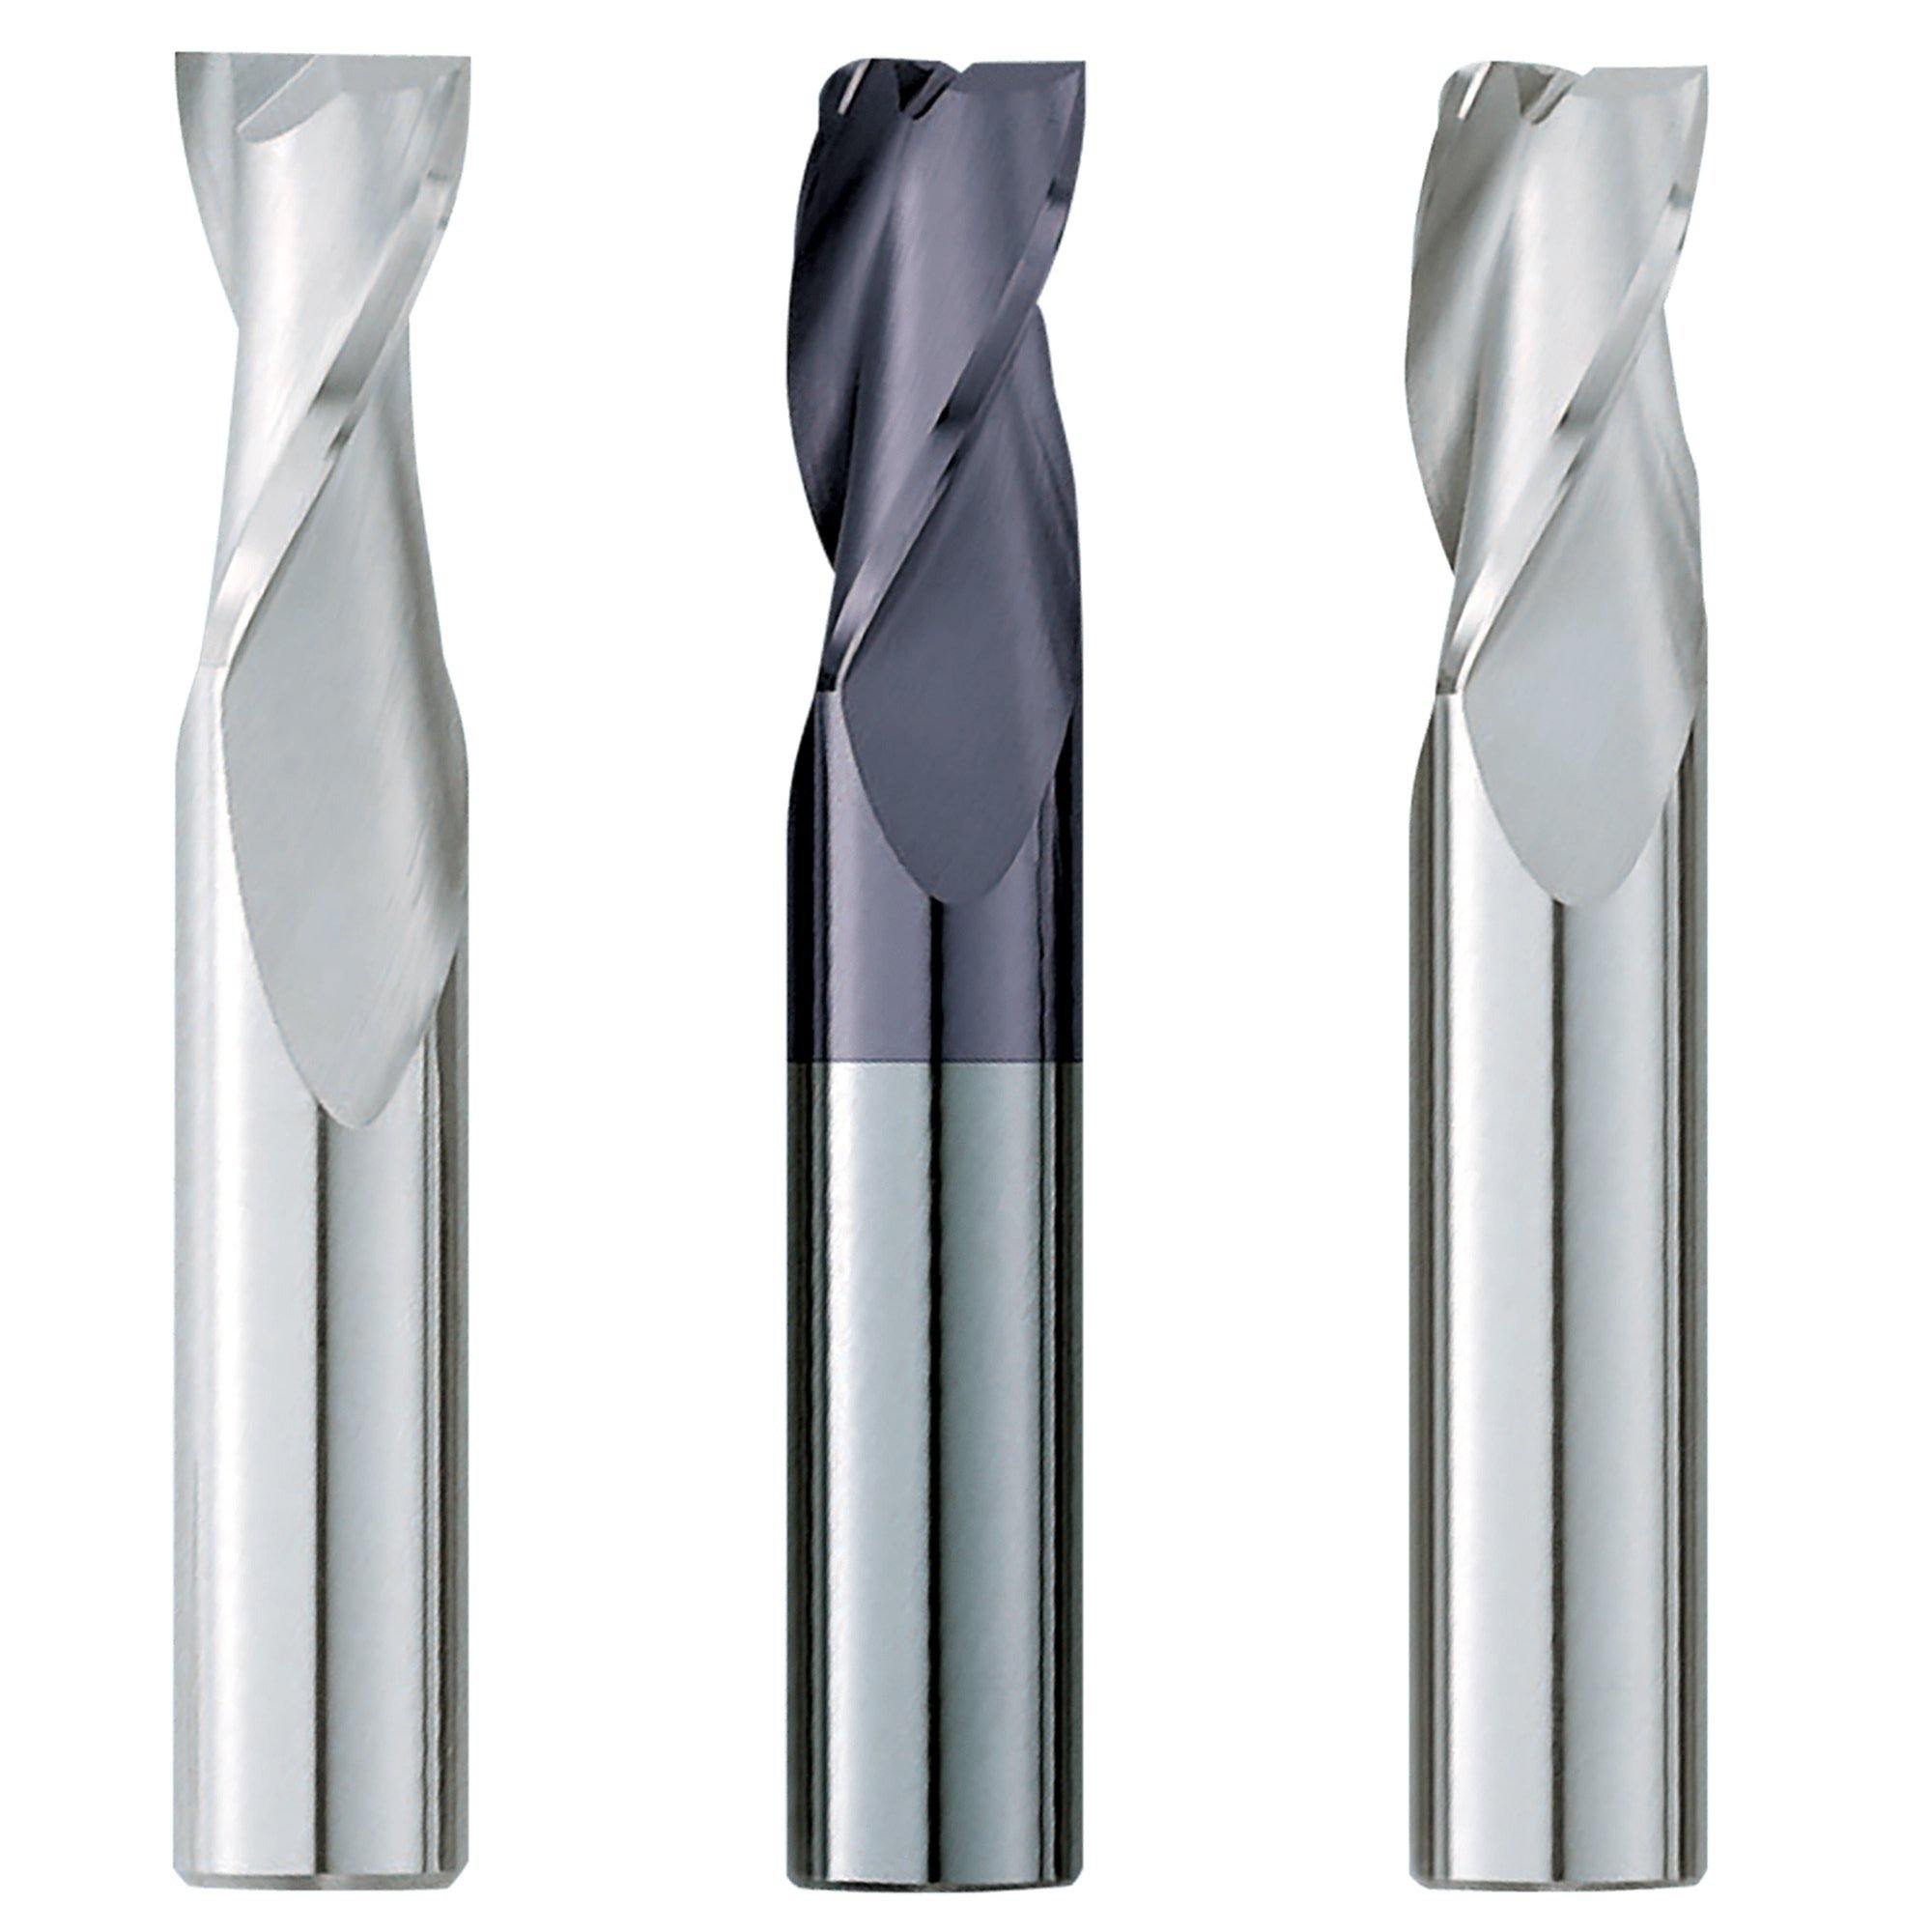 (3 Pack) 19/32" x 1-1/4" x 3-1/2" Standard Square Carbide End Mill - The End Mill Store 